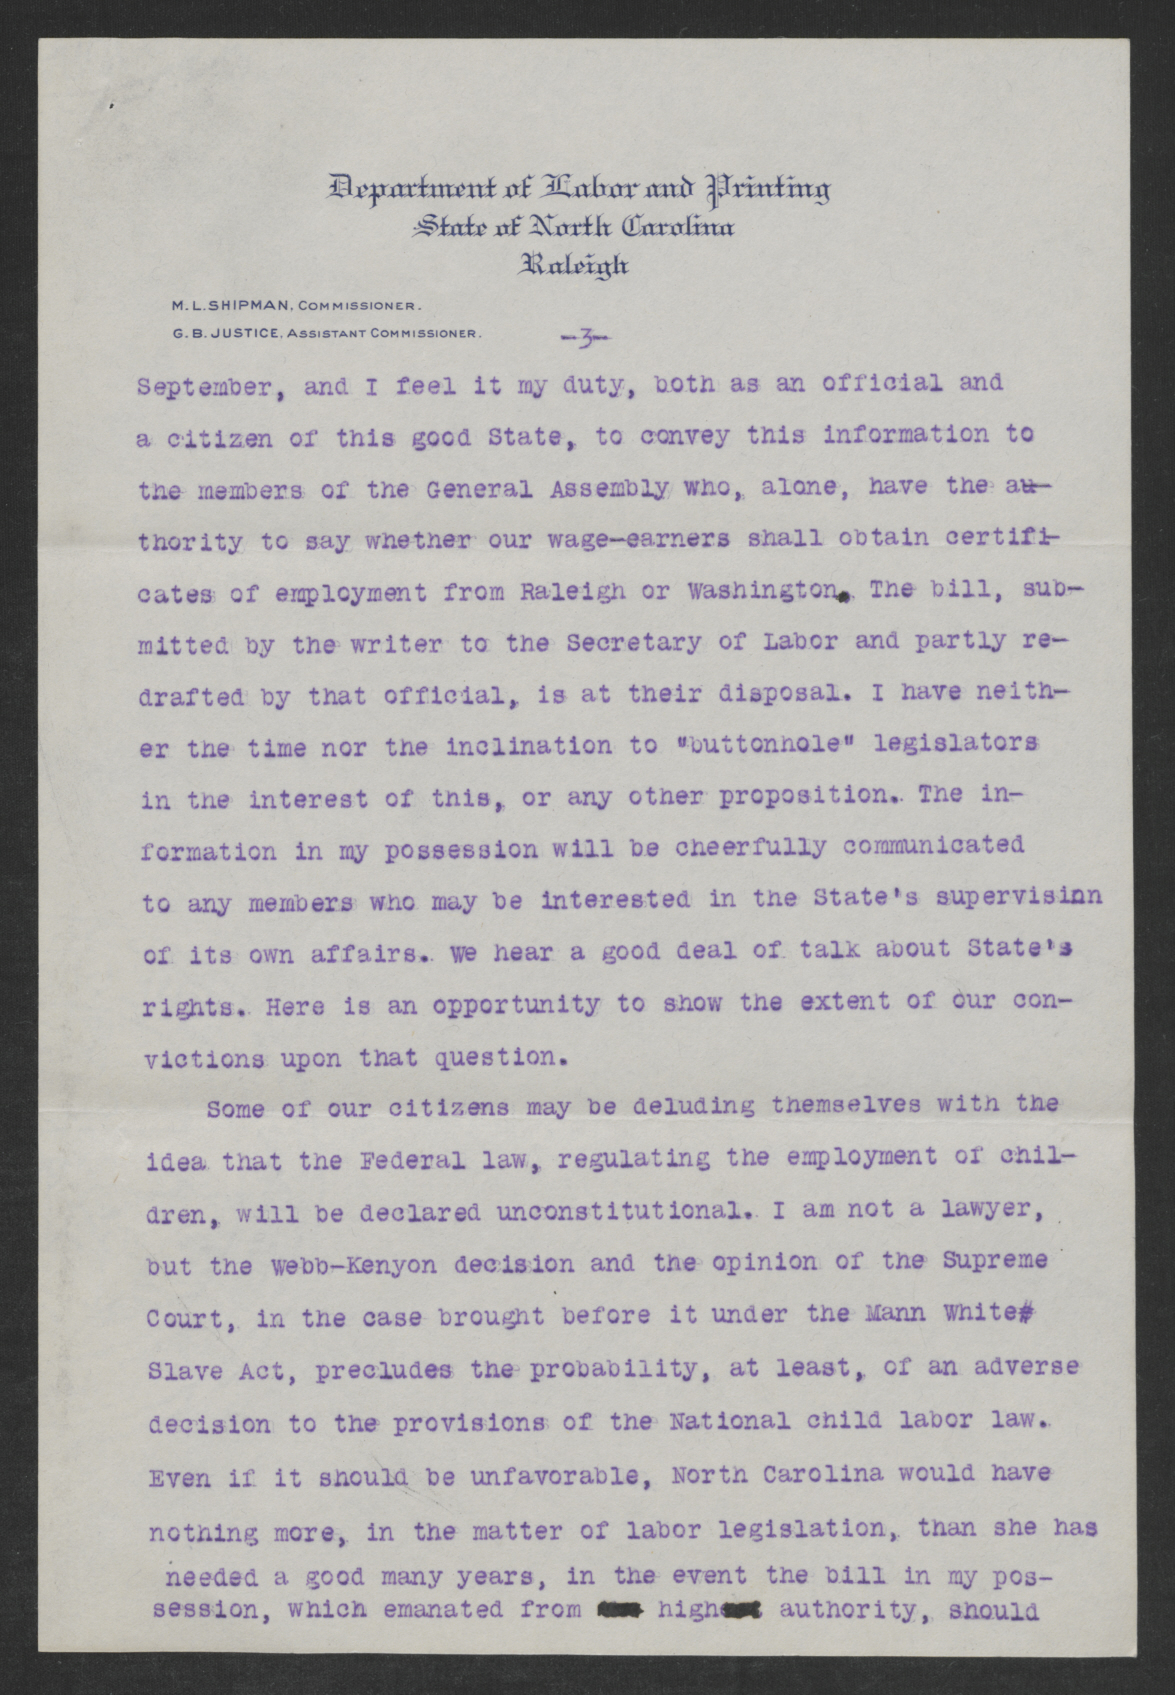 Letter from Mitchell L. Shipman to Thomas W. Bickett, February 19, 1917, page 3